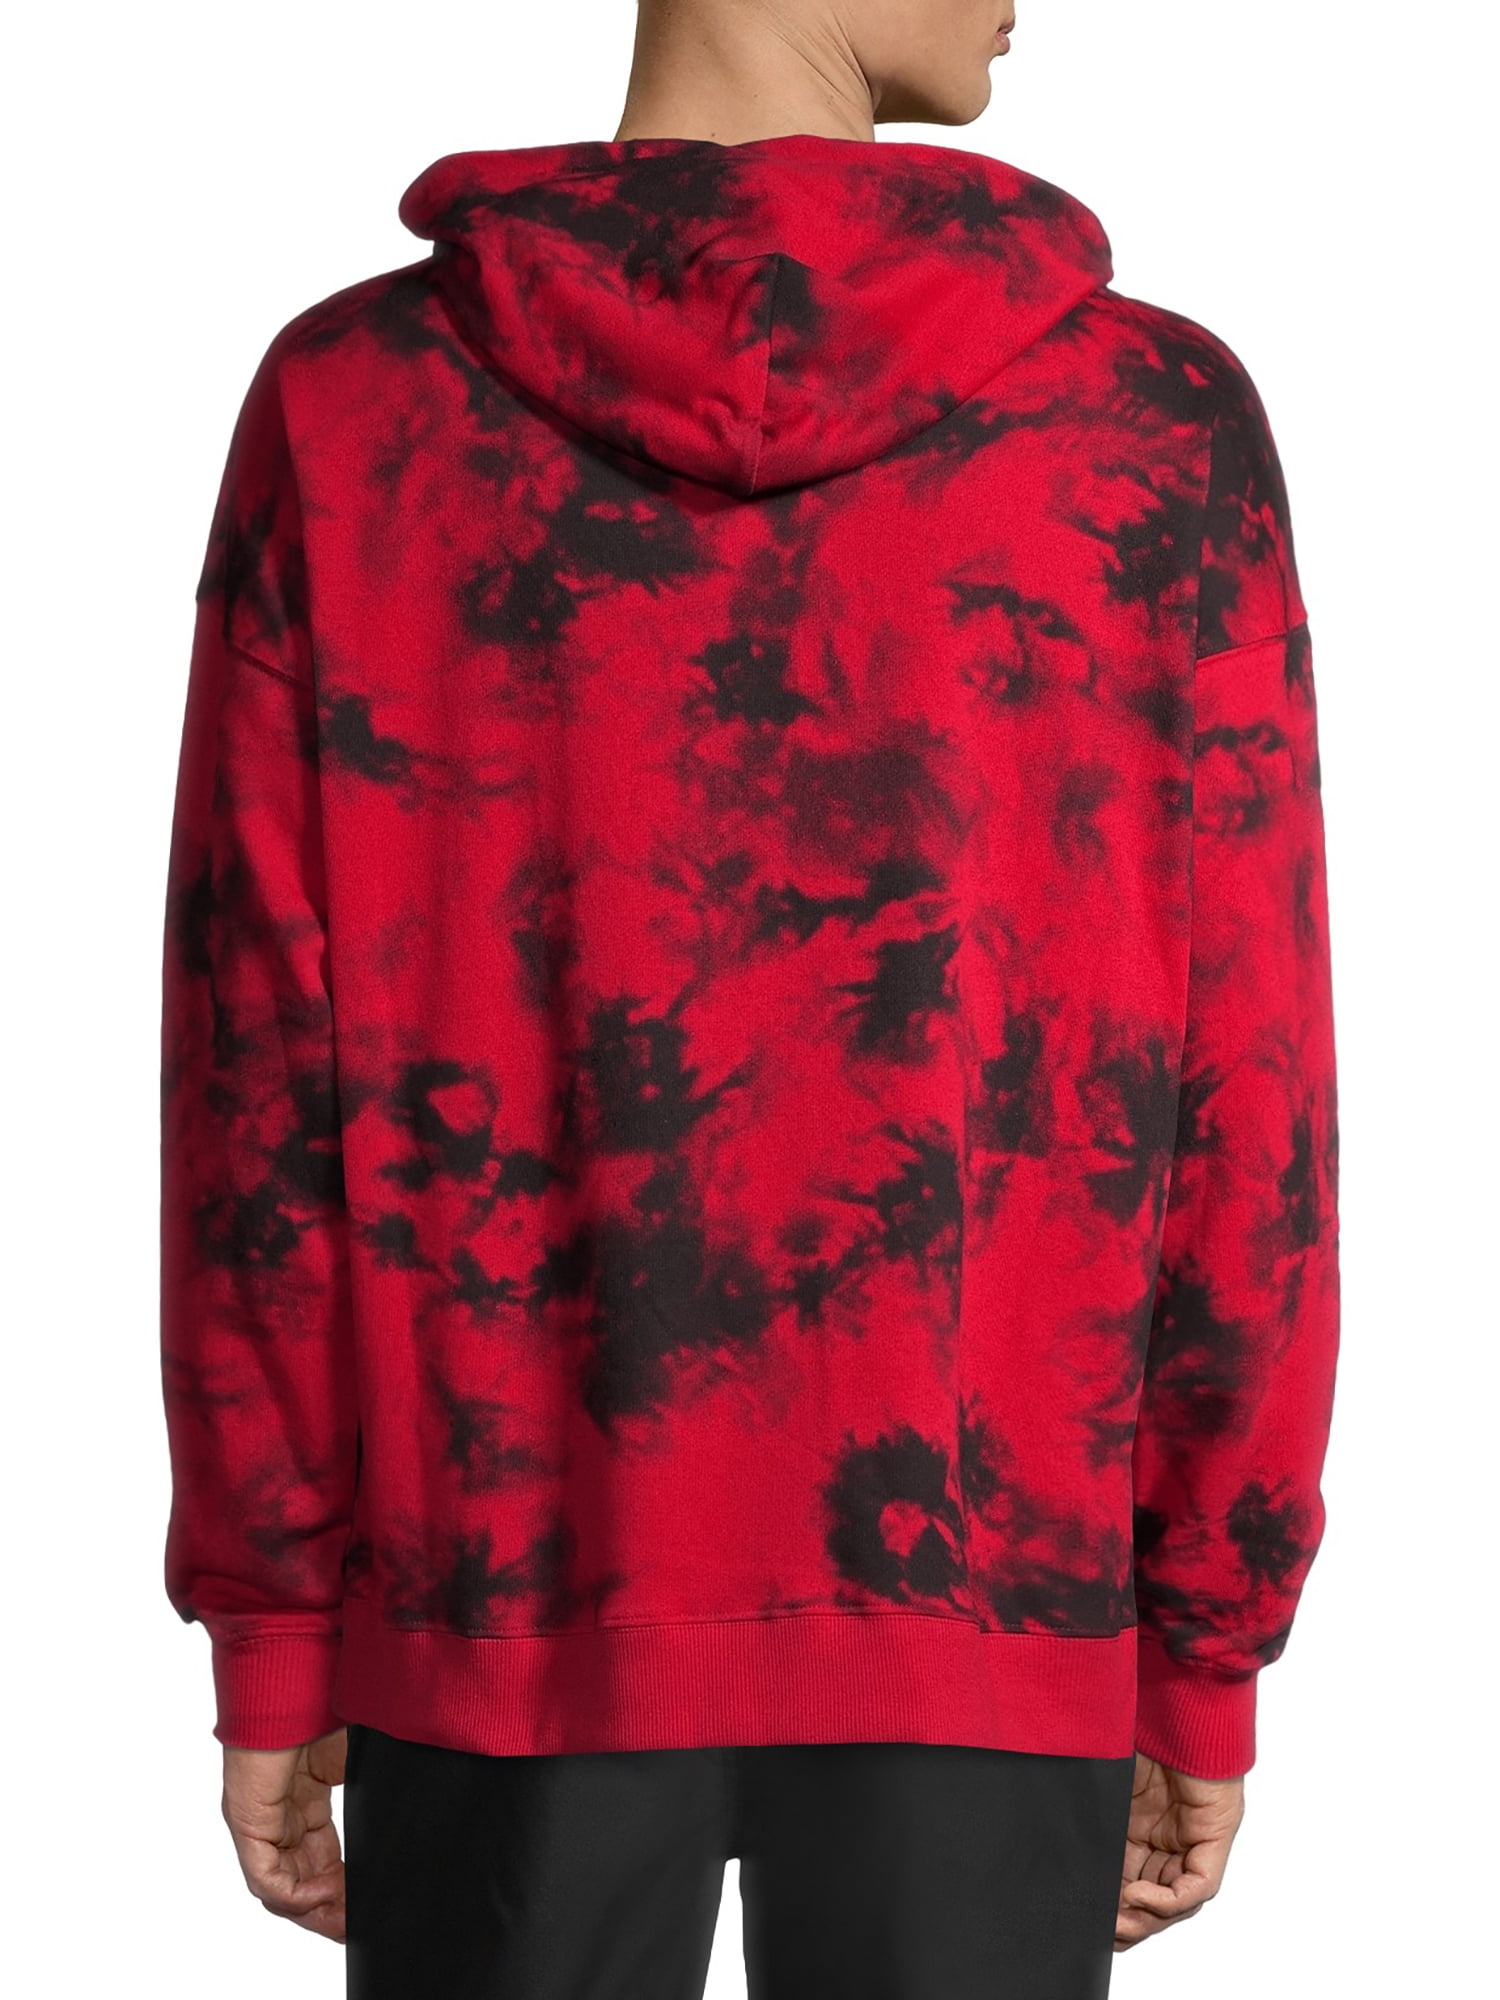 Tie Dye Hoodie 3xl on Sale, UP TO 52% OFF | www.rupit.com